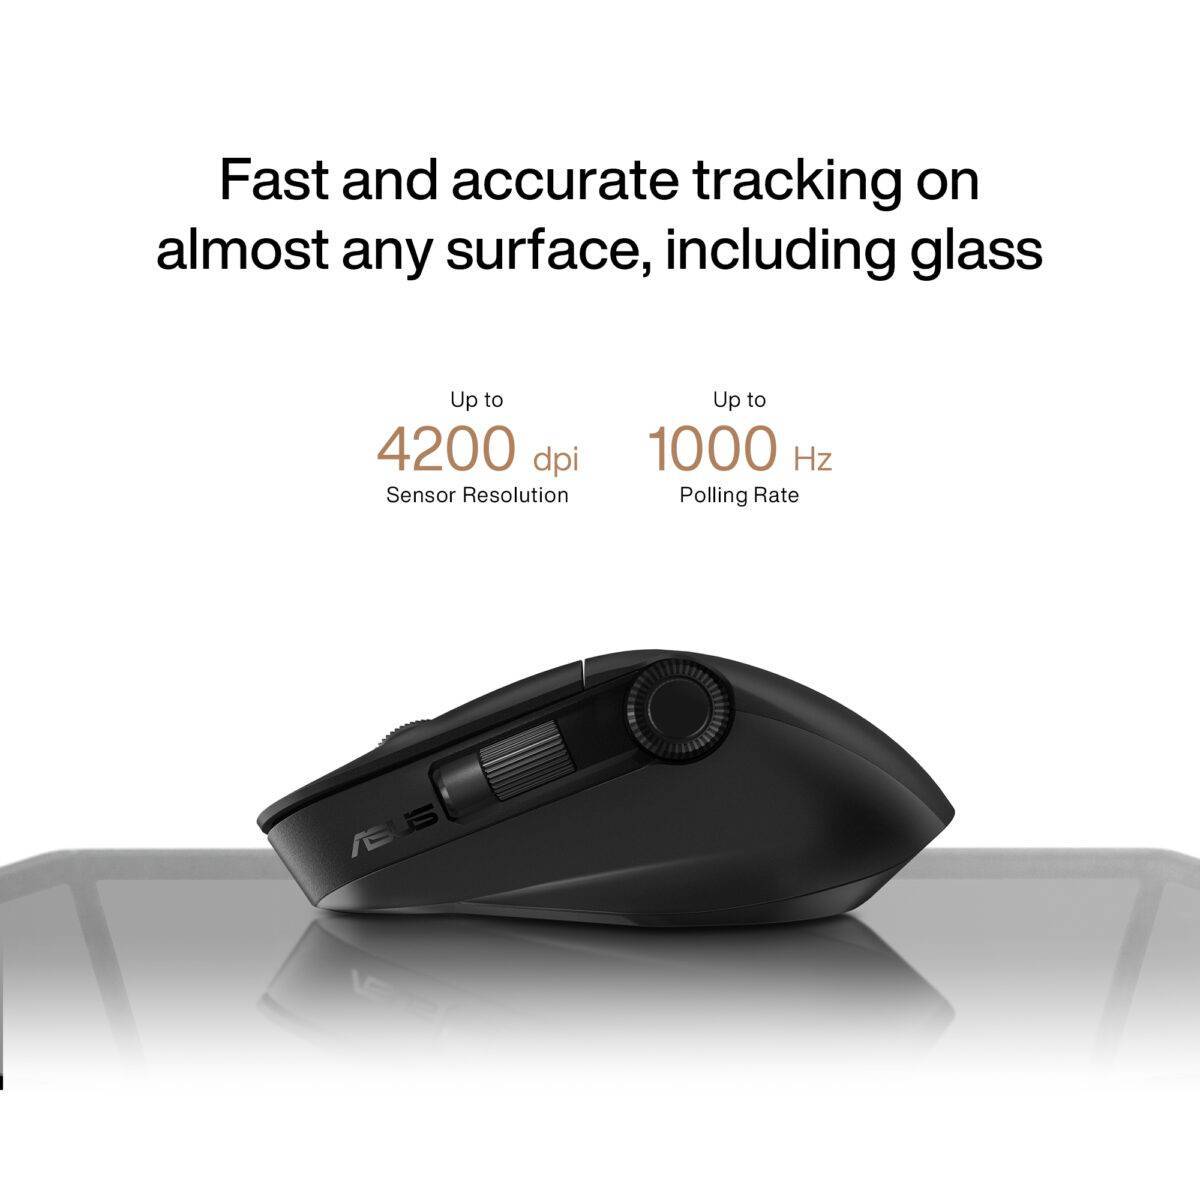 The high-performance laser sensor tracks at up to 4200 dpi and has a 1000 Hz maximum polling rate and works on a wide range of surfaces, including glass* — delivering high-grade accuracy and precision. *Minimum 4 mm glass thickness.